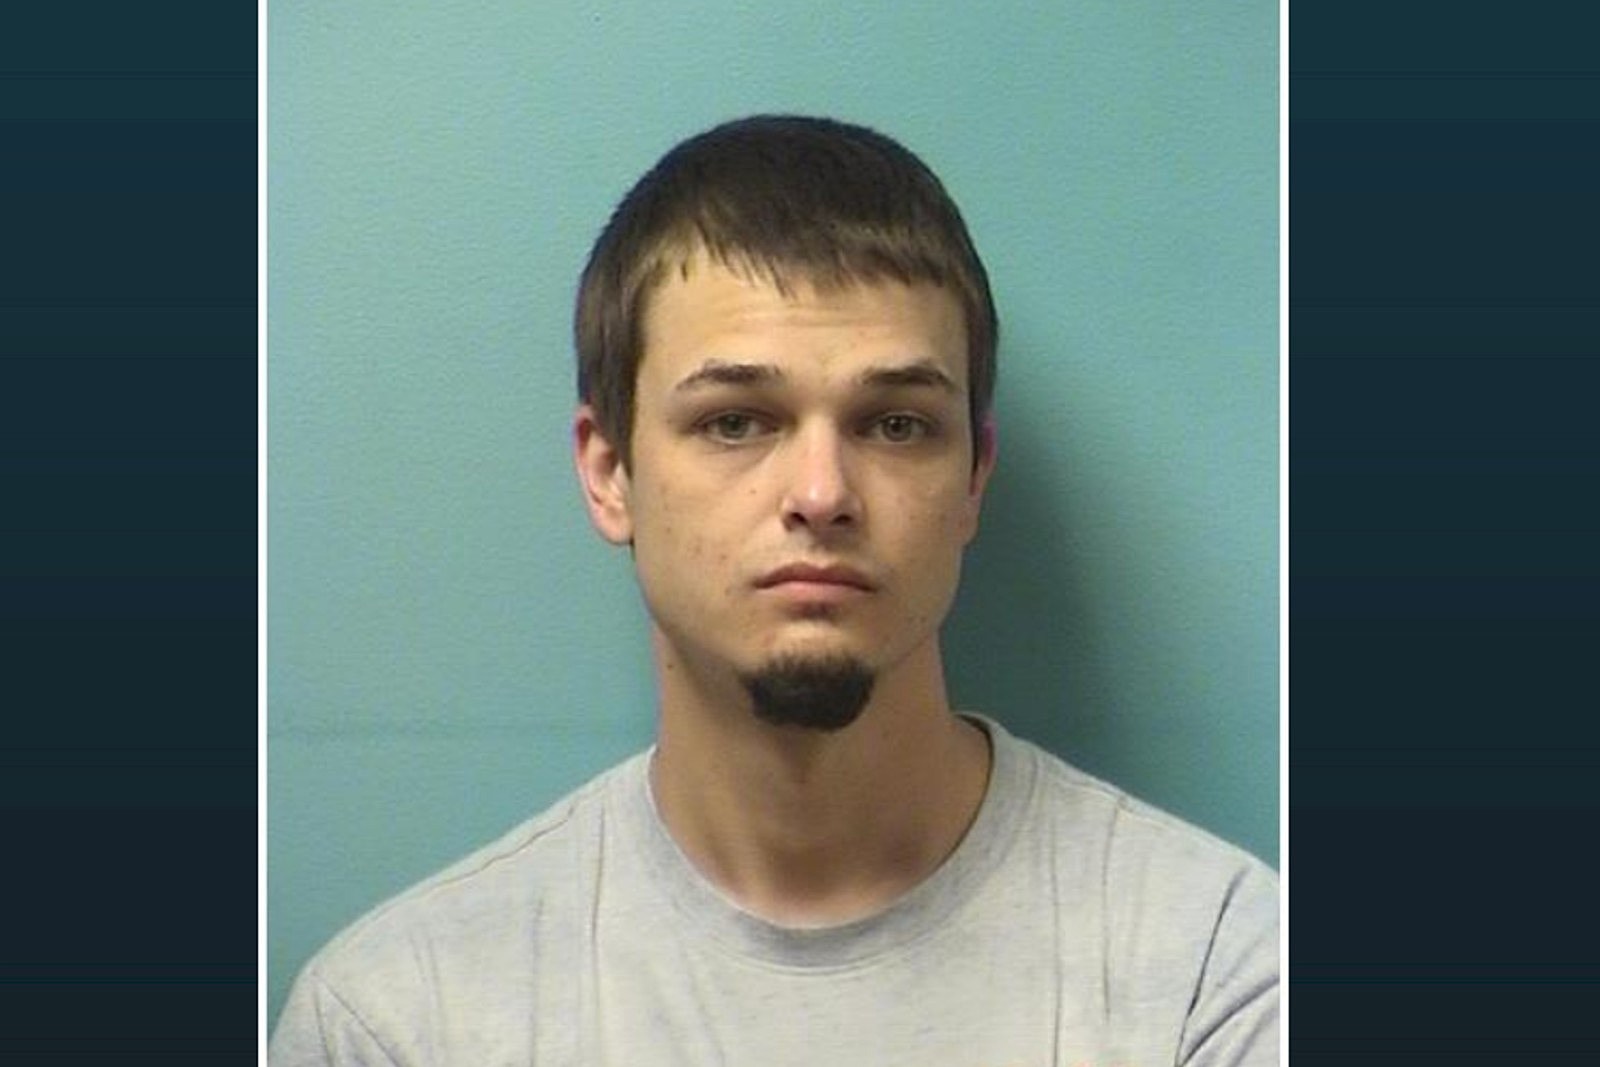 Annandale Man Pleads Guilty to Murder in Fatal Drug Overdose pic